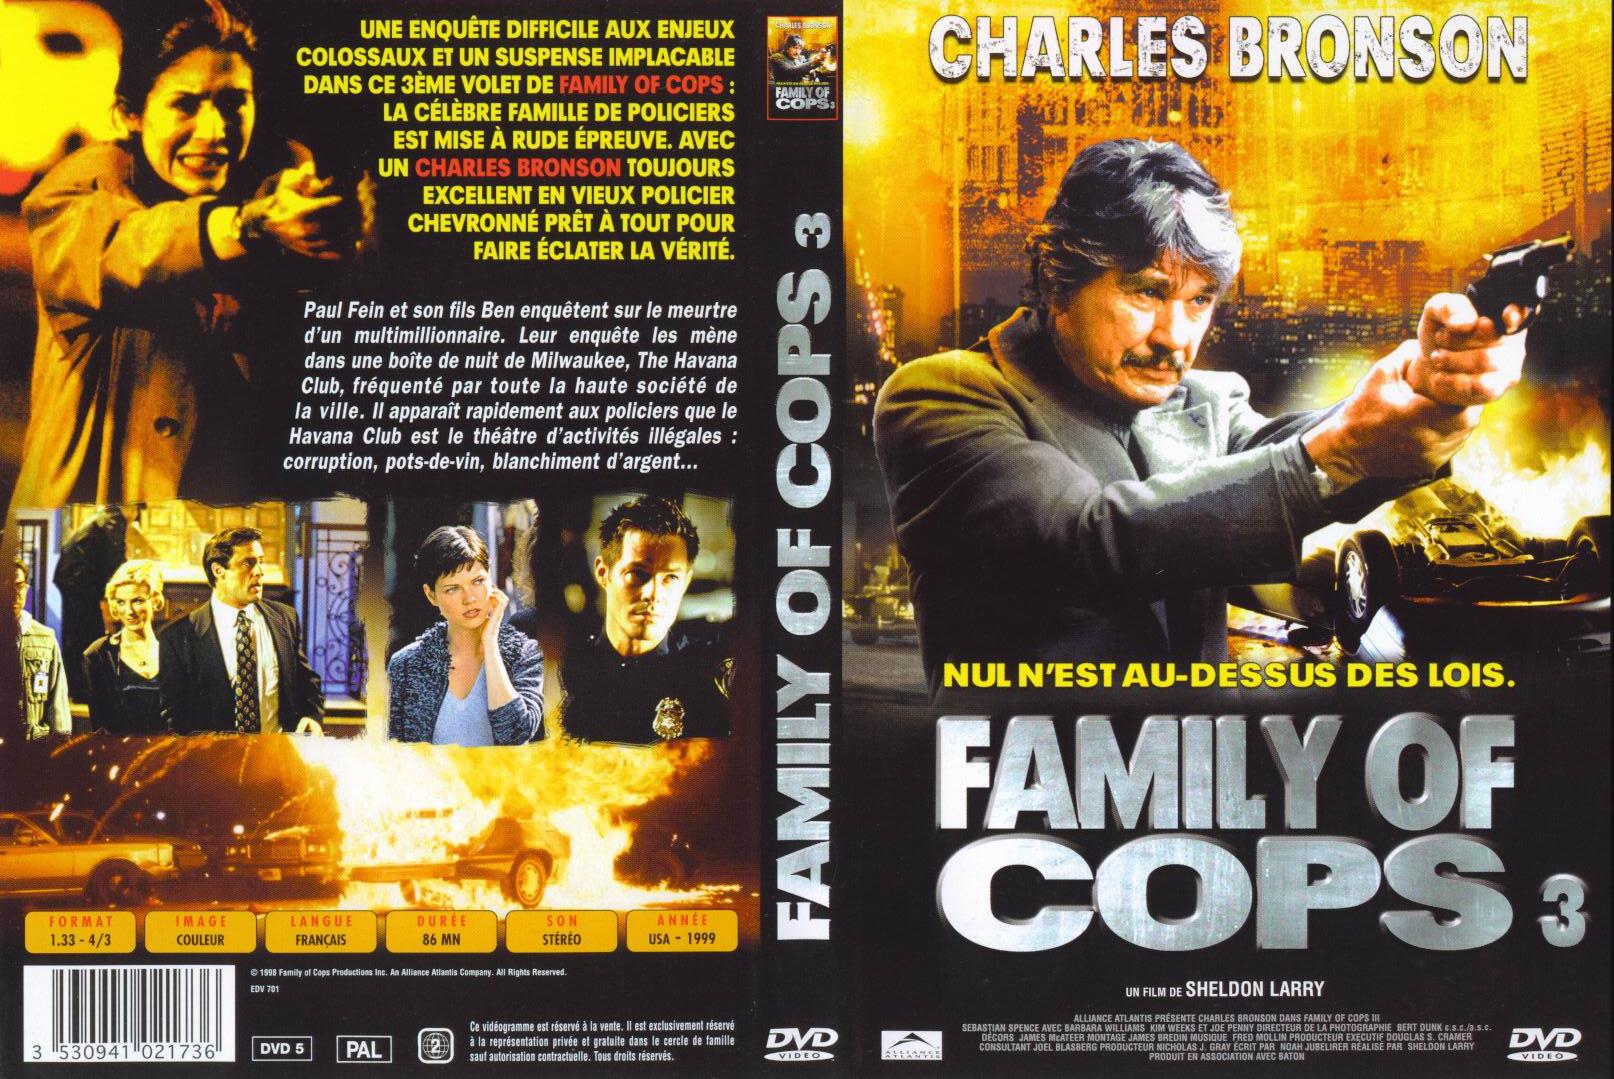 Jaquette DVD Family of cops 3